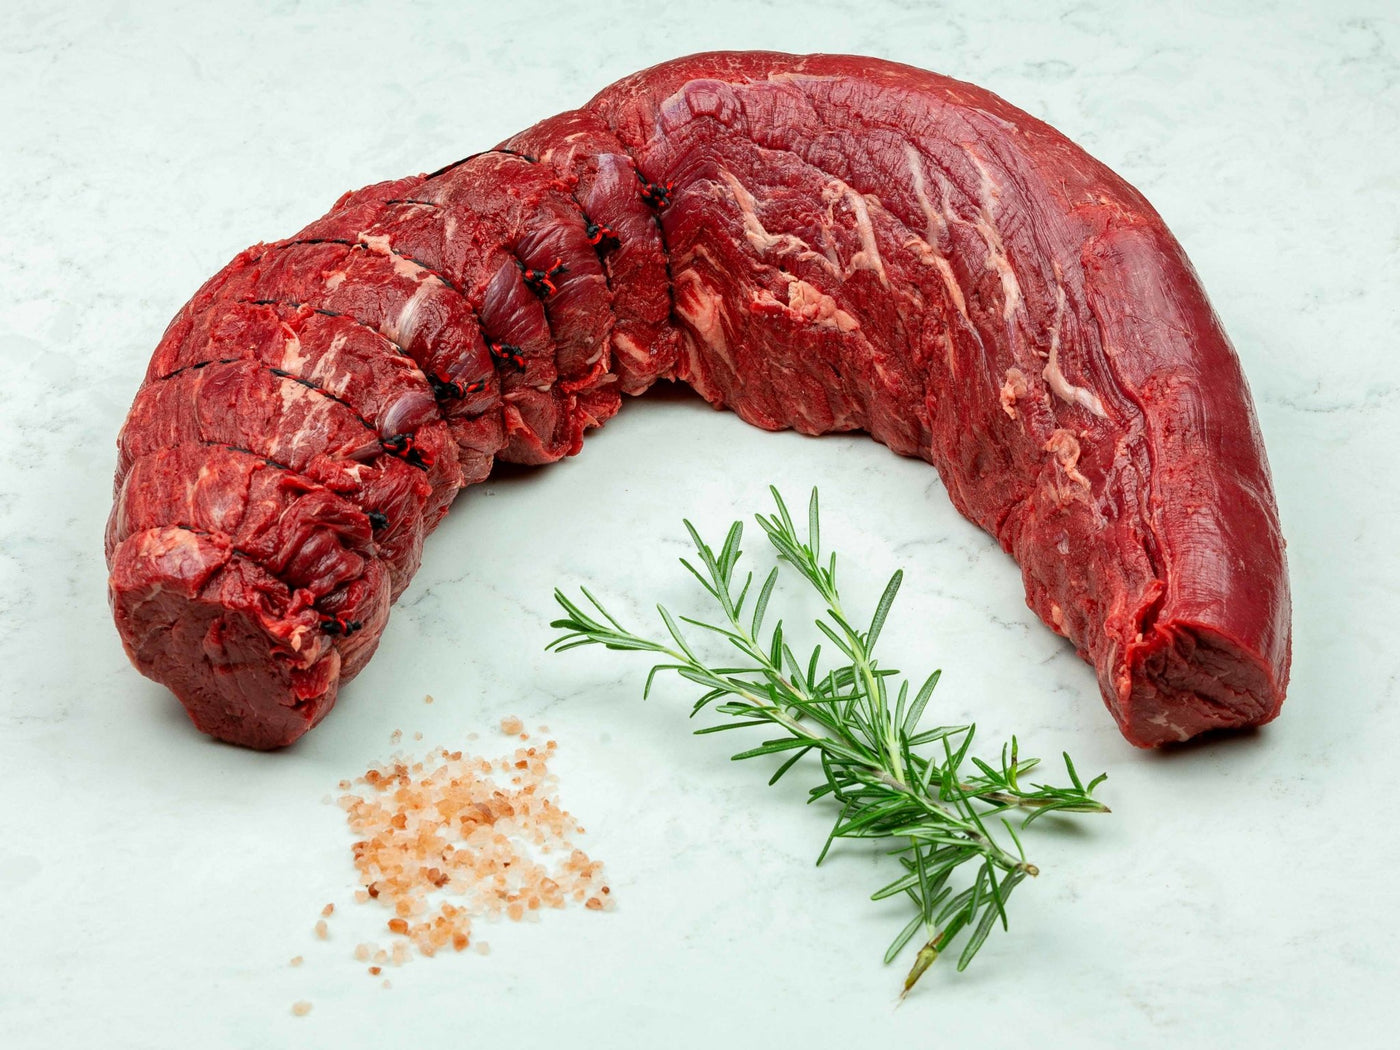 Grass Fed, Dry-Aged Fillet - Whole - Thomas Joseph Butchery - Ethical Dry-Aged Meat The Best Steak UK Thomas Joseph Butchery